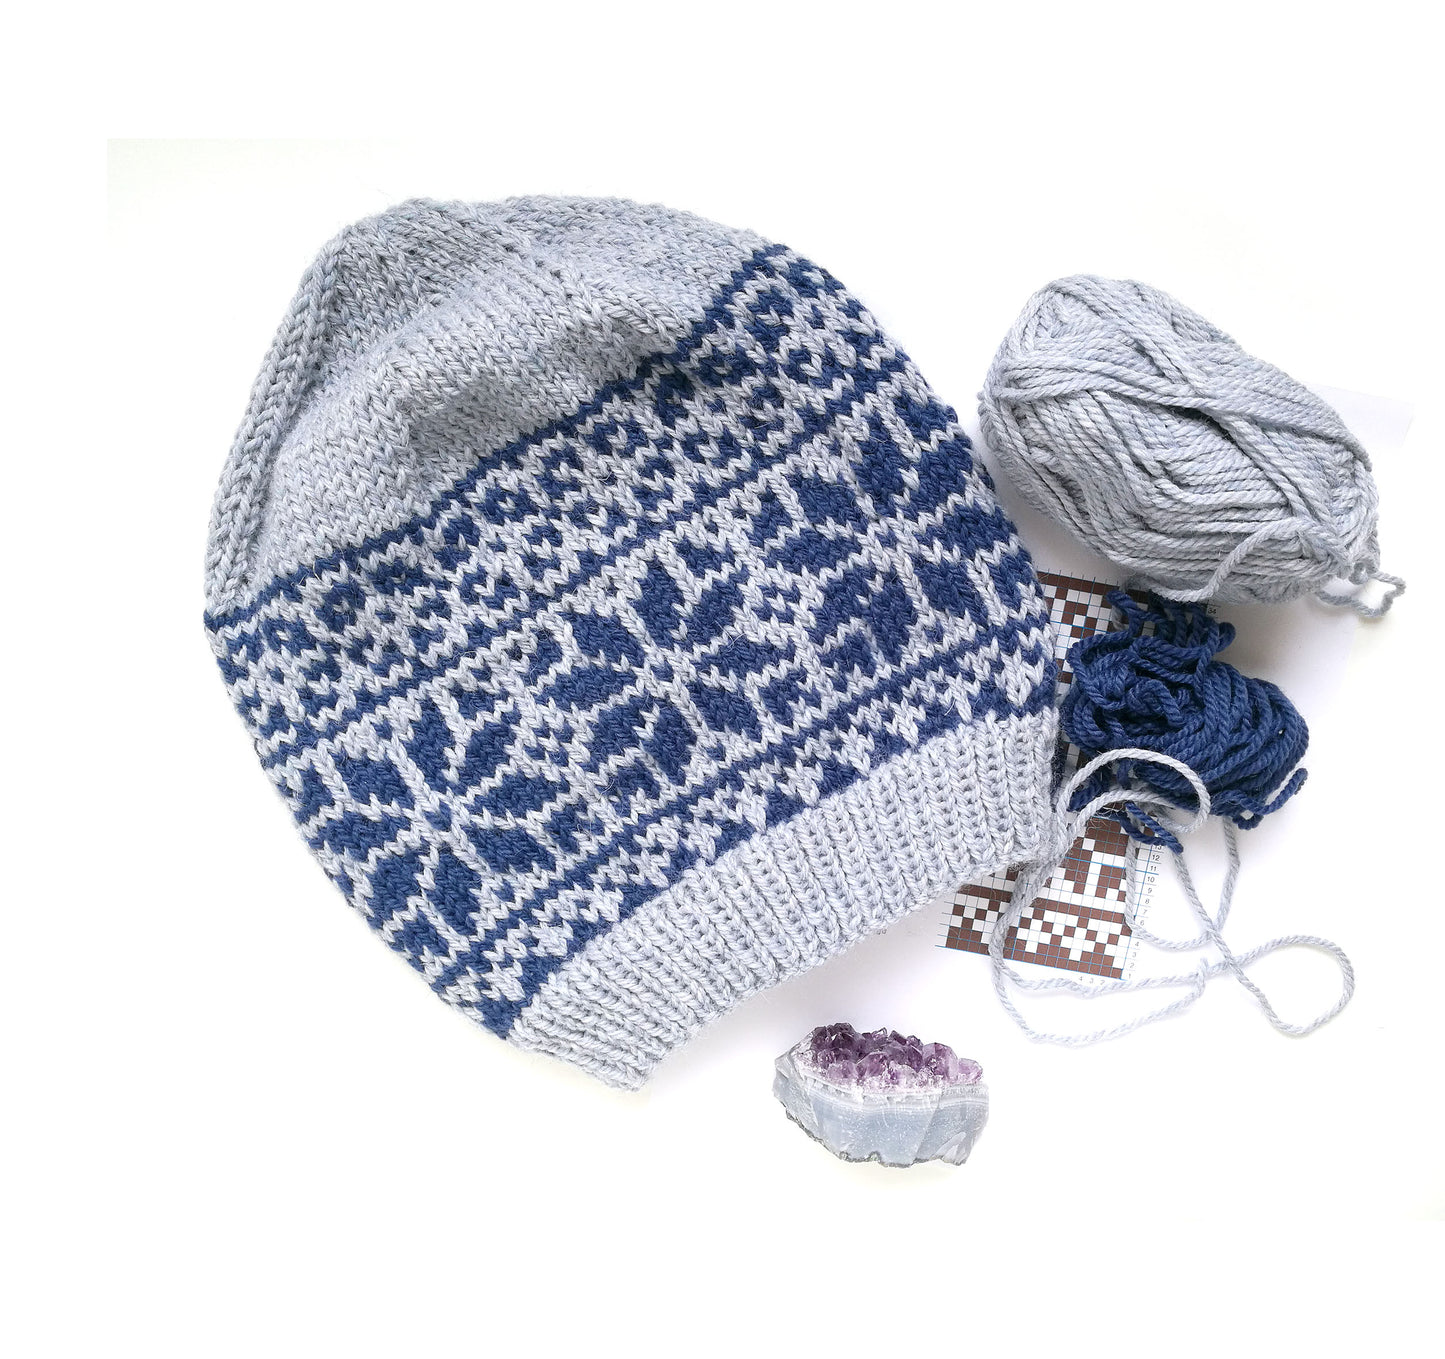 grey and blue wool hand-knitted Fair Isle beanie hat in Roses knitting pattern